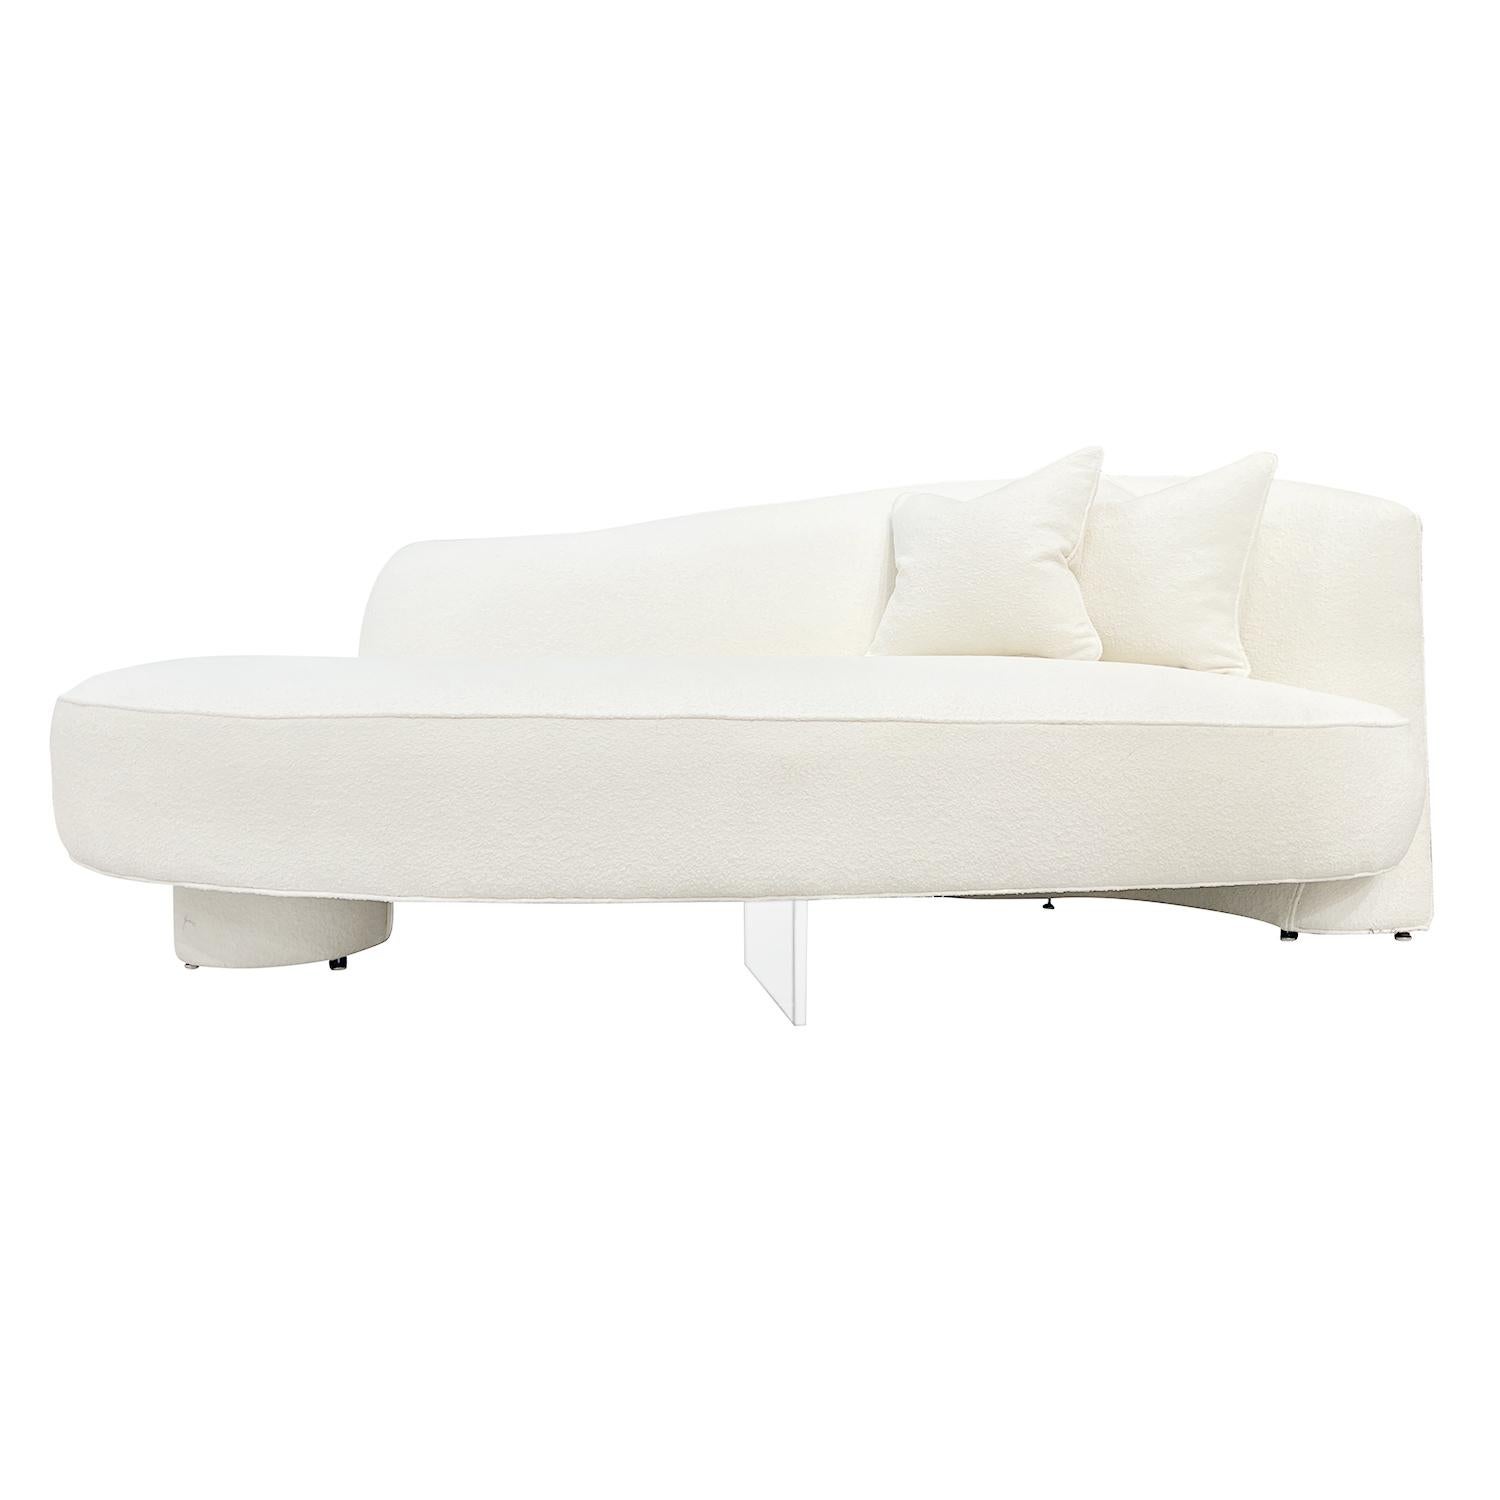 A vintage Mid-Century Modern American four seater Serpentine sofa with two pillows, designed by Vladimir Kagan and produced by Directional in good condition. The seat backrest of the sculptured settee, canapé is arched resting on two wide